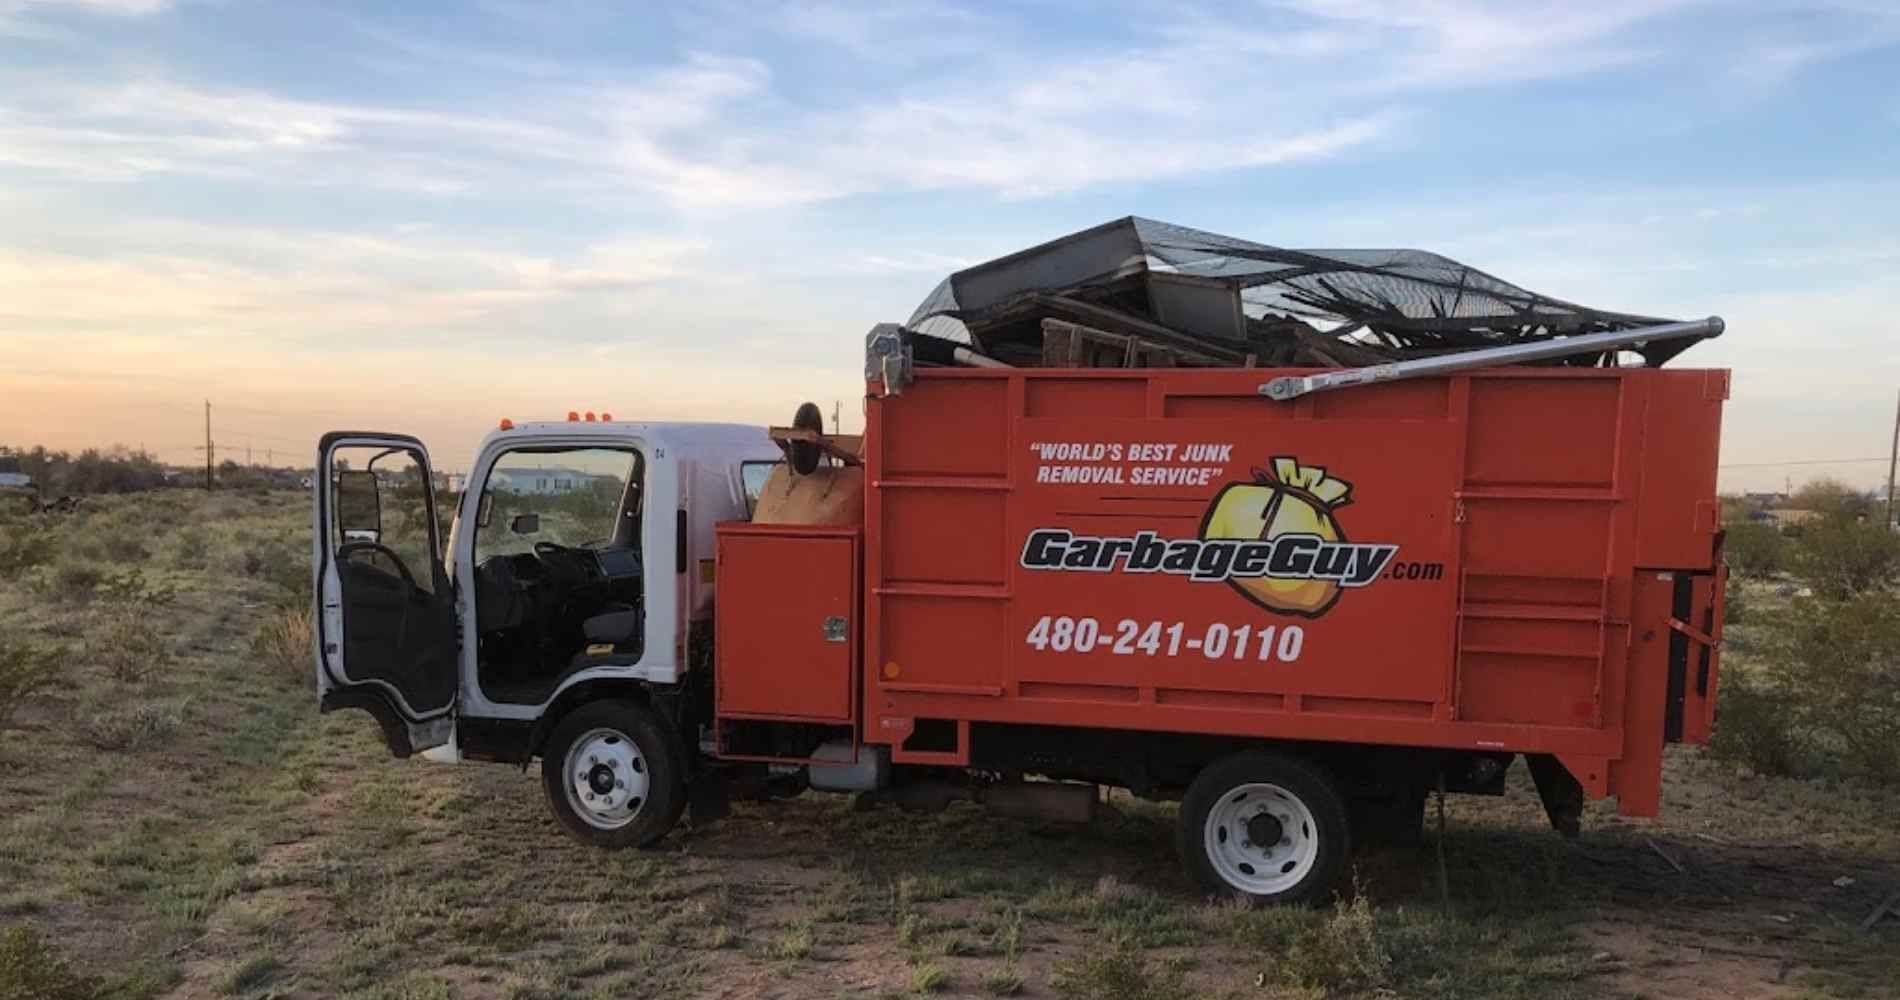 #1 for Junk Removal in Glendale, AZ with Over 1200 5-Star Reviews!